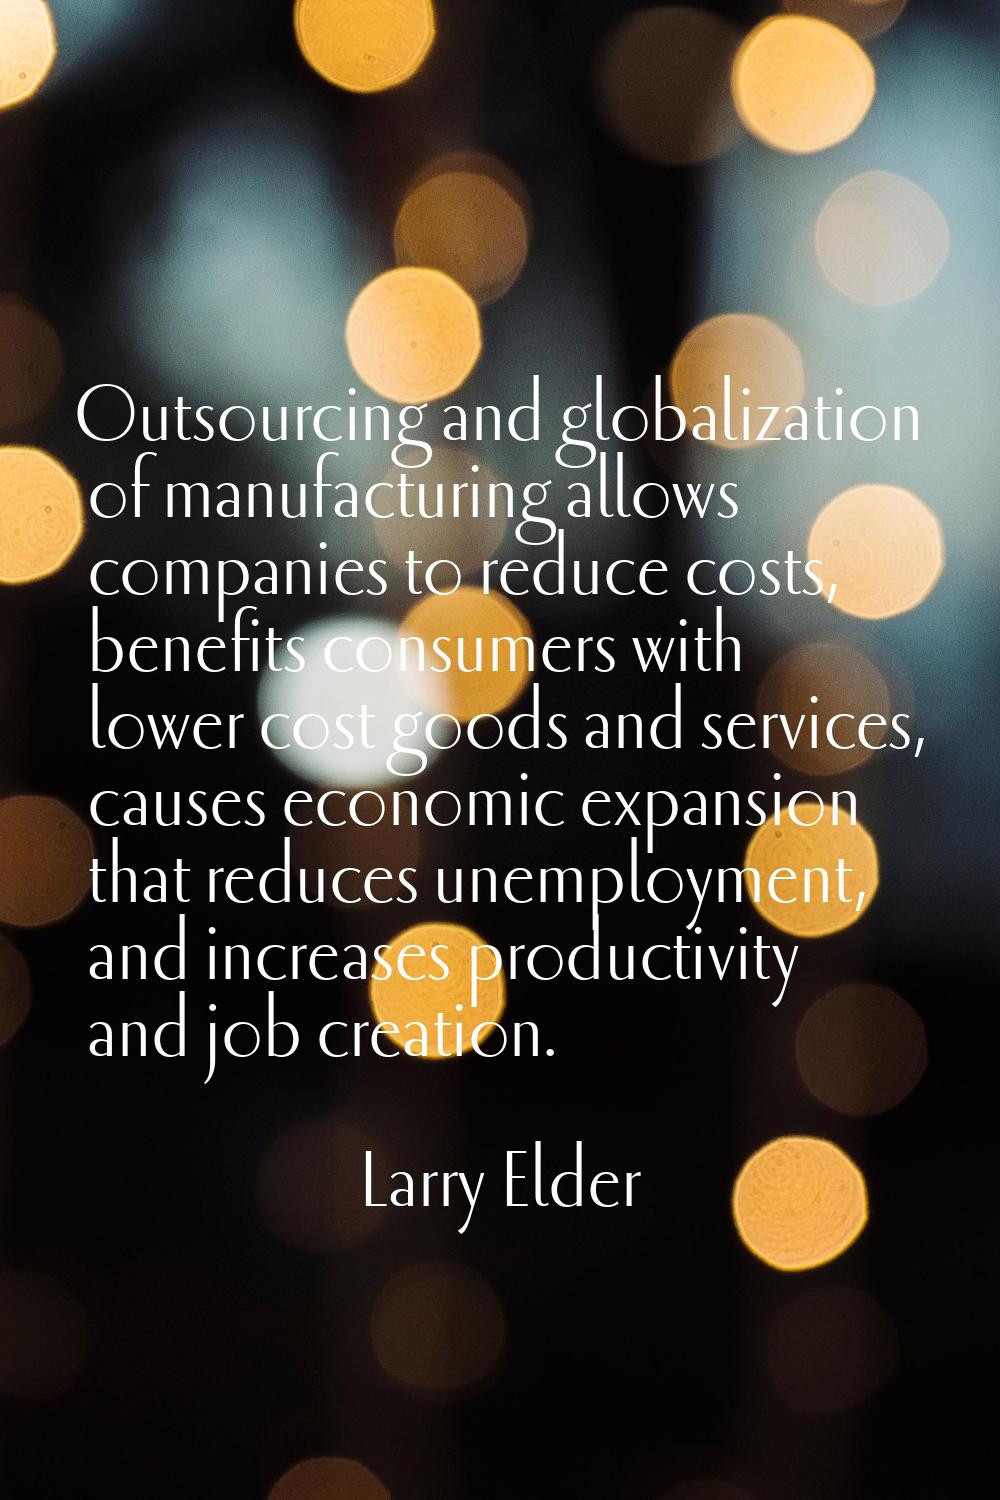 Outsourcing and globalization of manufacturing allows companies to reduce costs, benefits consumers